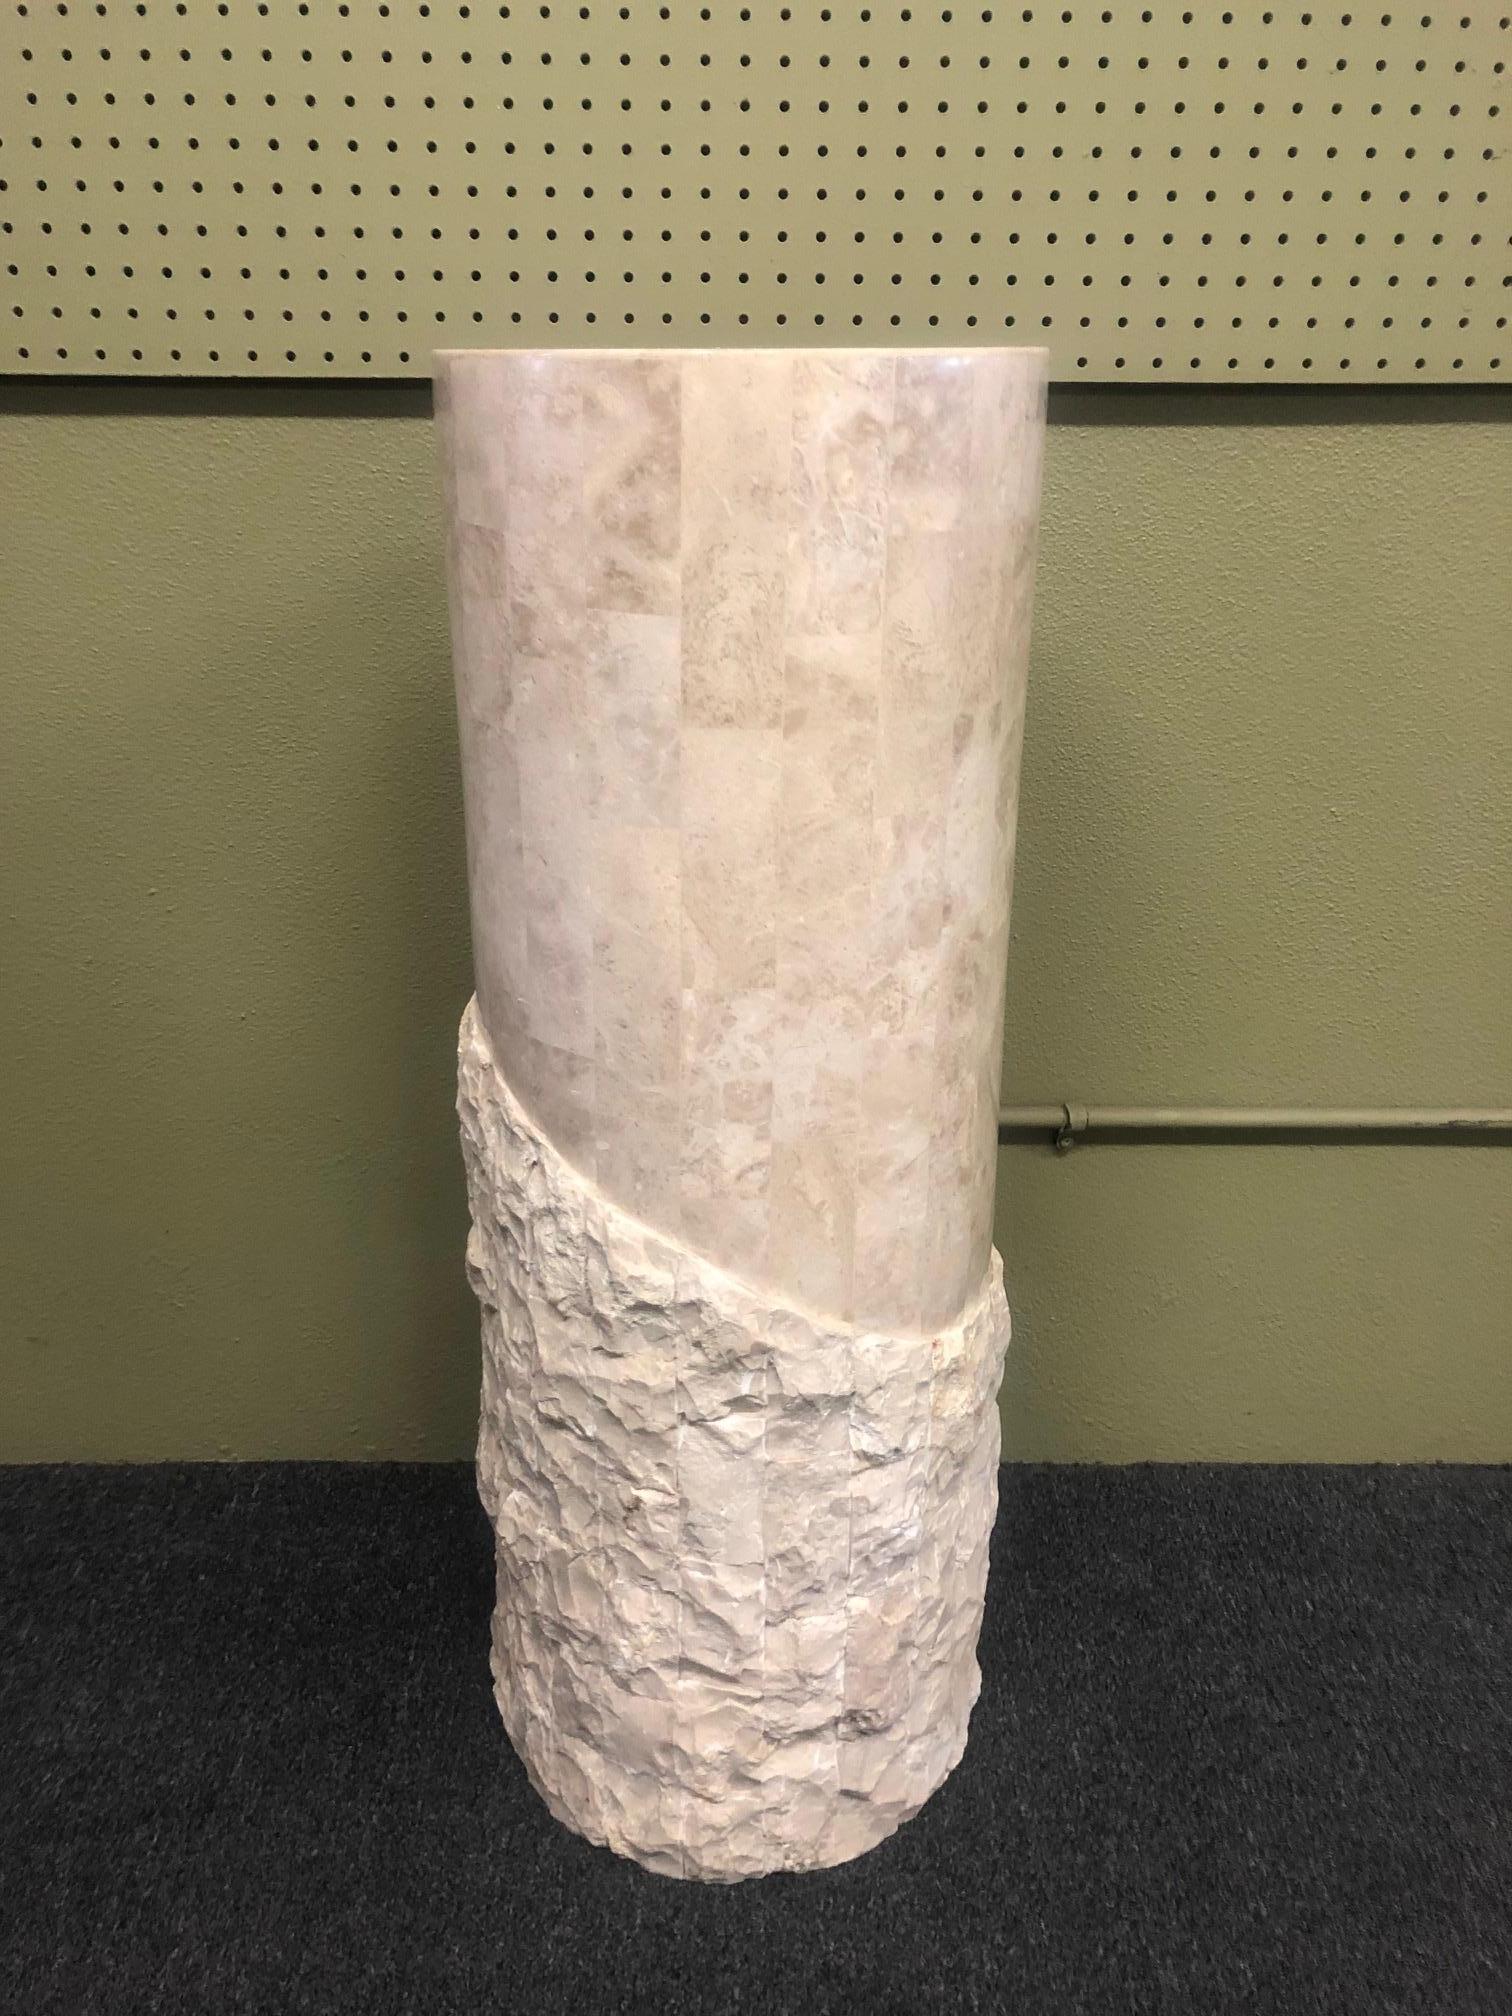 A very nice round tessellated stone display pedestal by Marquis of Beverly Hills, circa 1990s. The bottom portion of the piece has a rugged stone exterior that melds into the smooth, polished top portion.
 